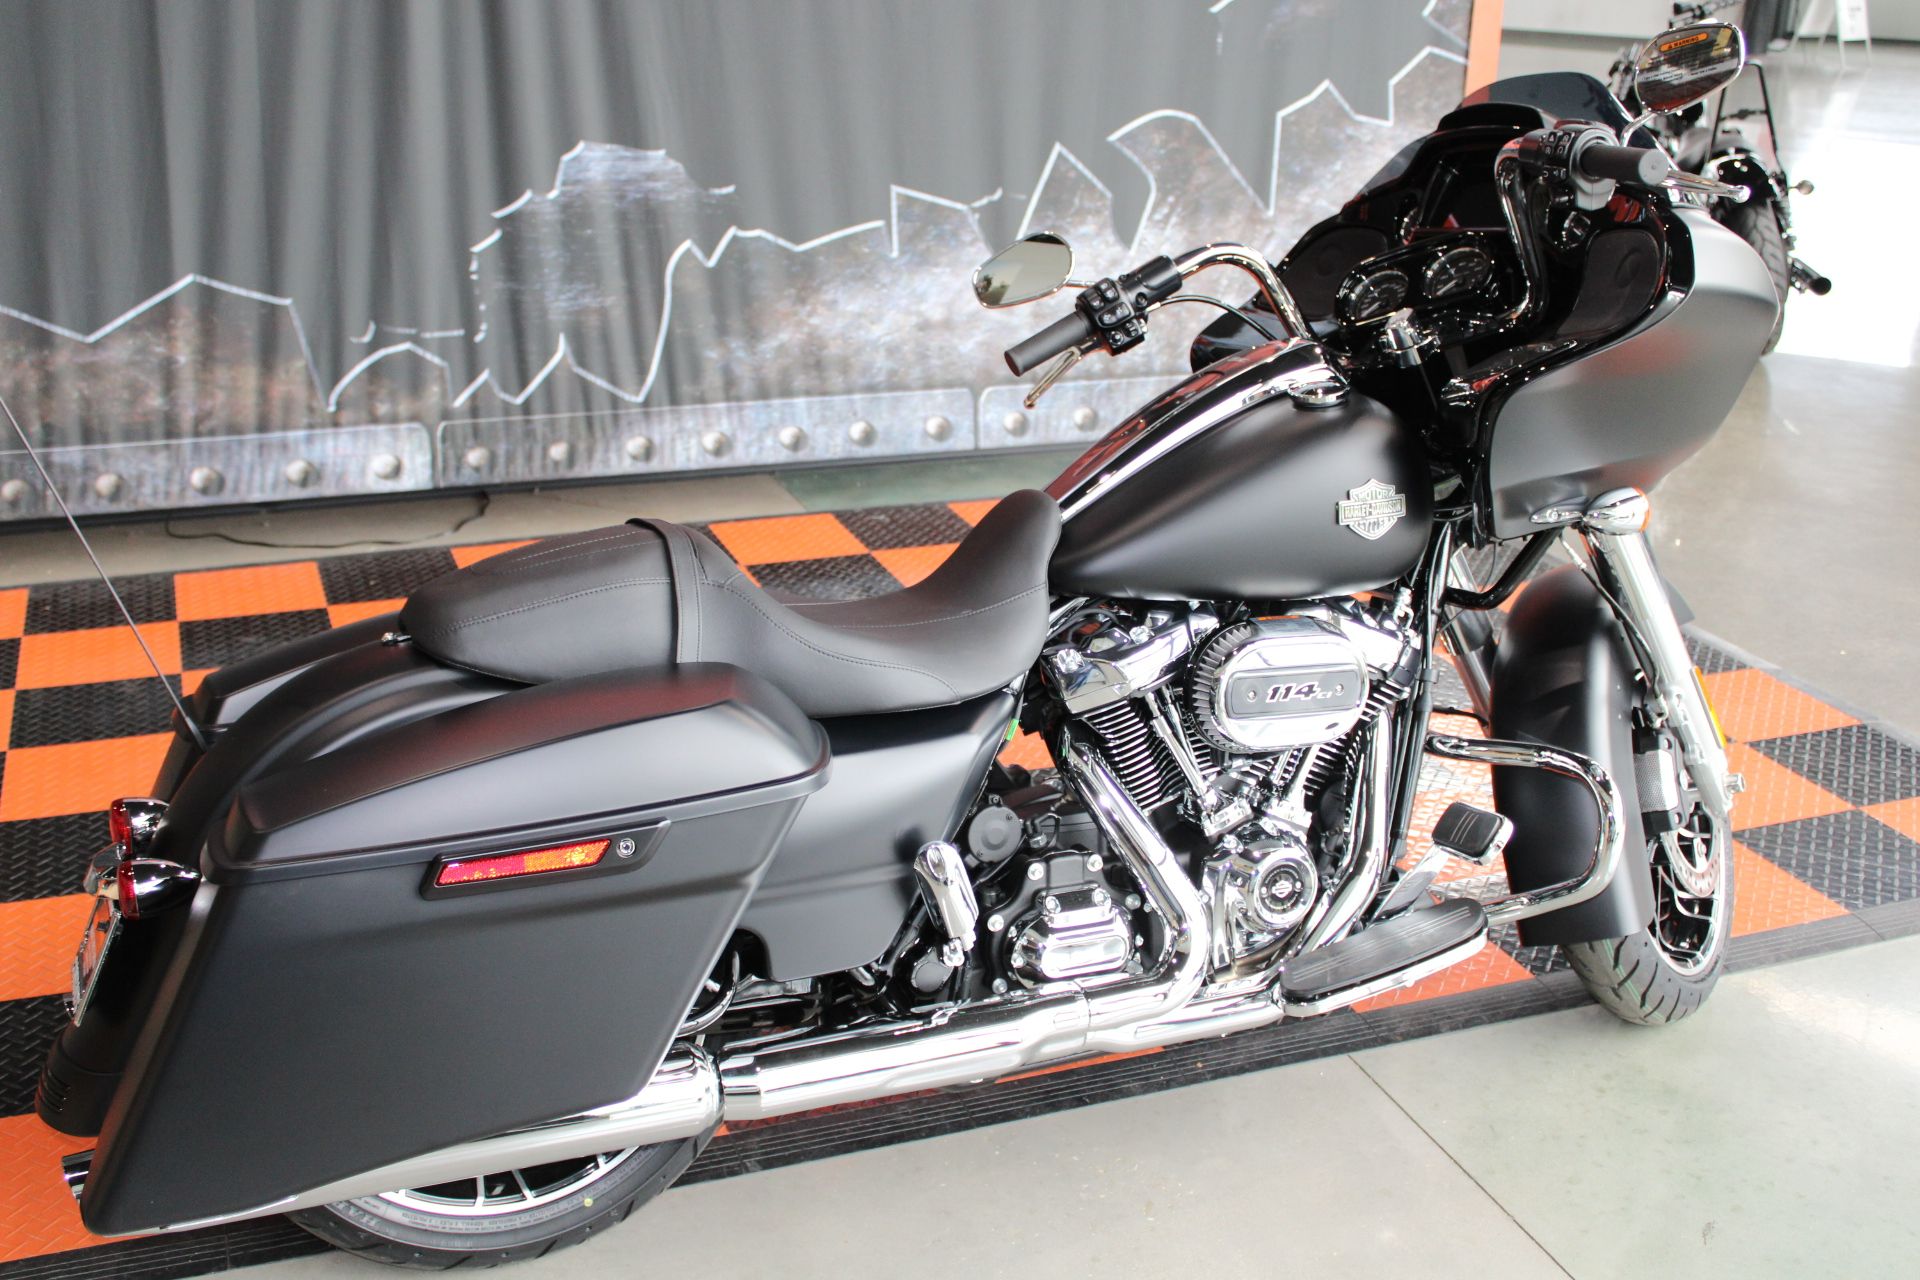 2022 Harley-Davidson Road Glide® Special in Shorewood, Illinois - Photo 14